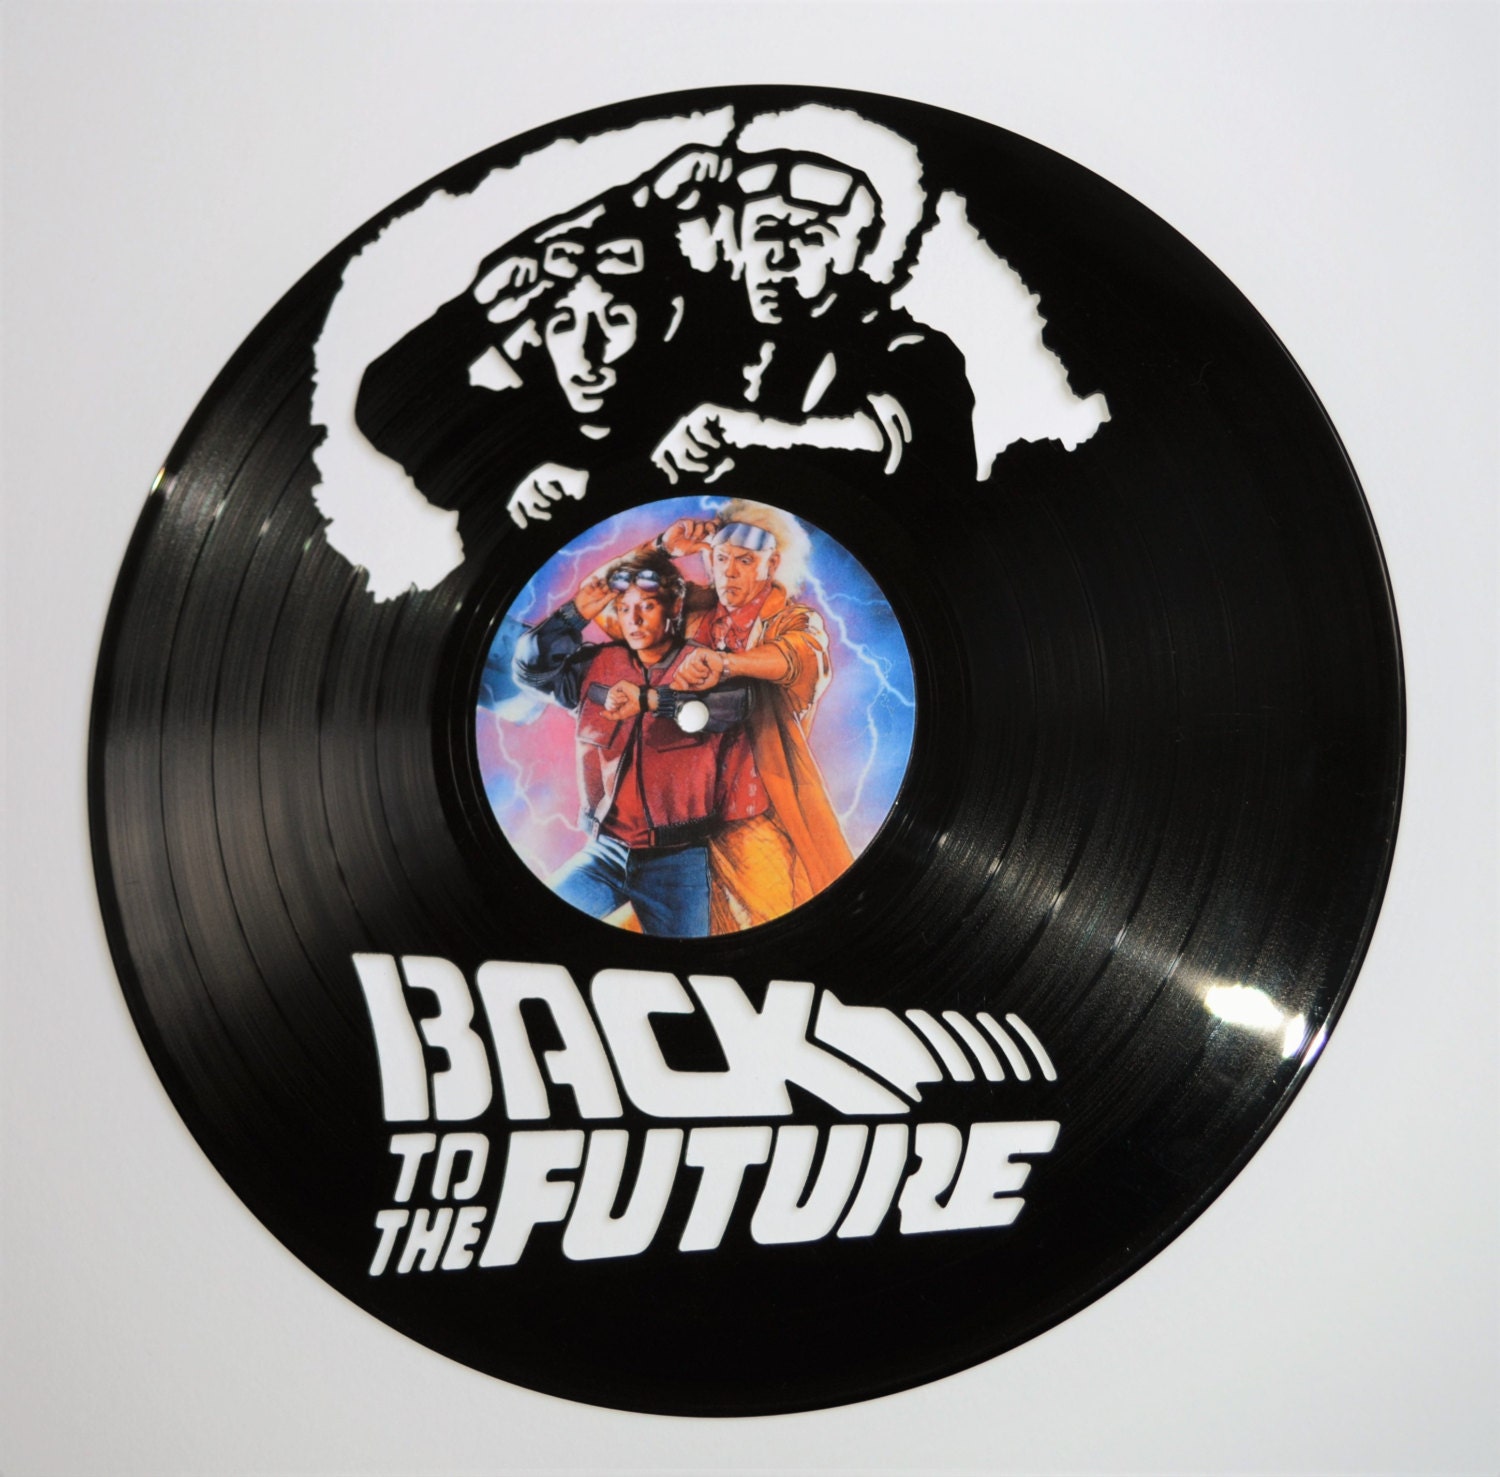 Back to the Future Vinyl Record Wall Art